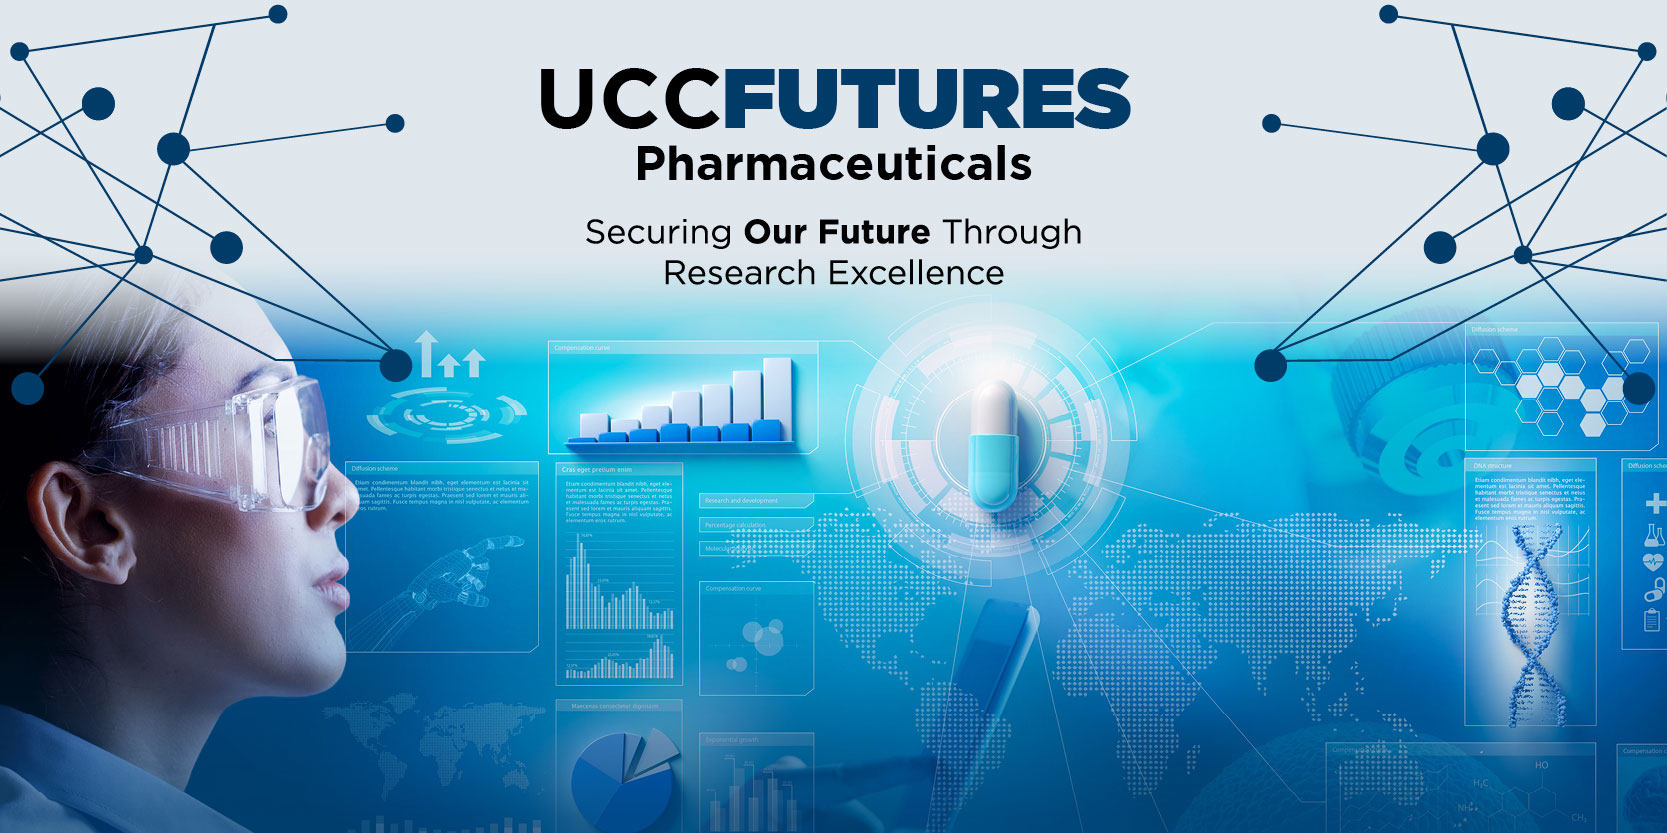 UCC announces new research drive for Future Pharmaceuticals